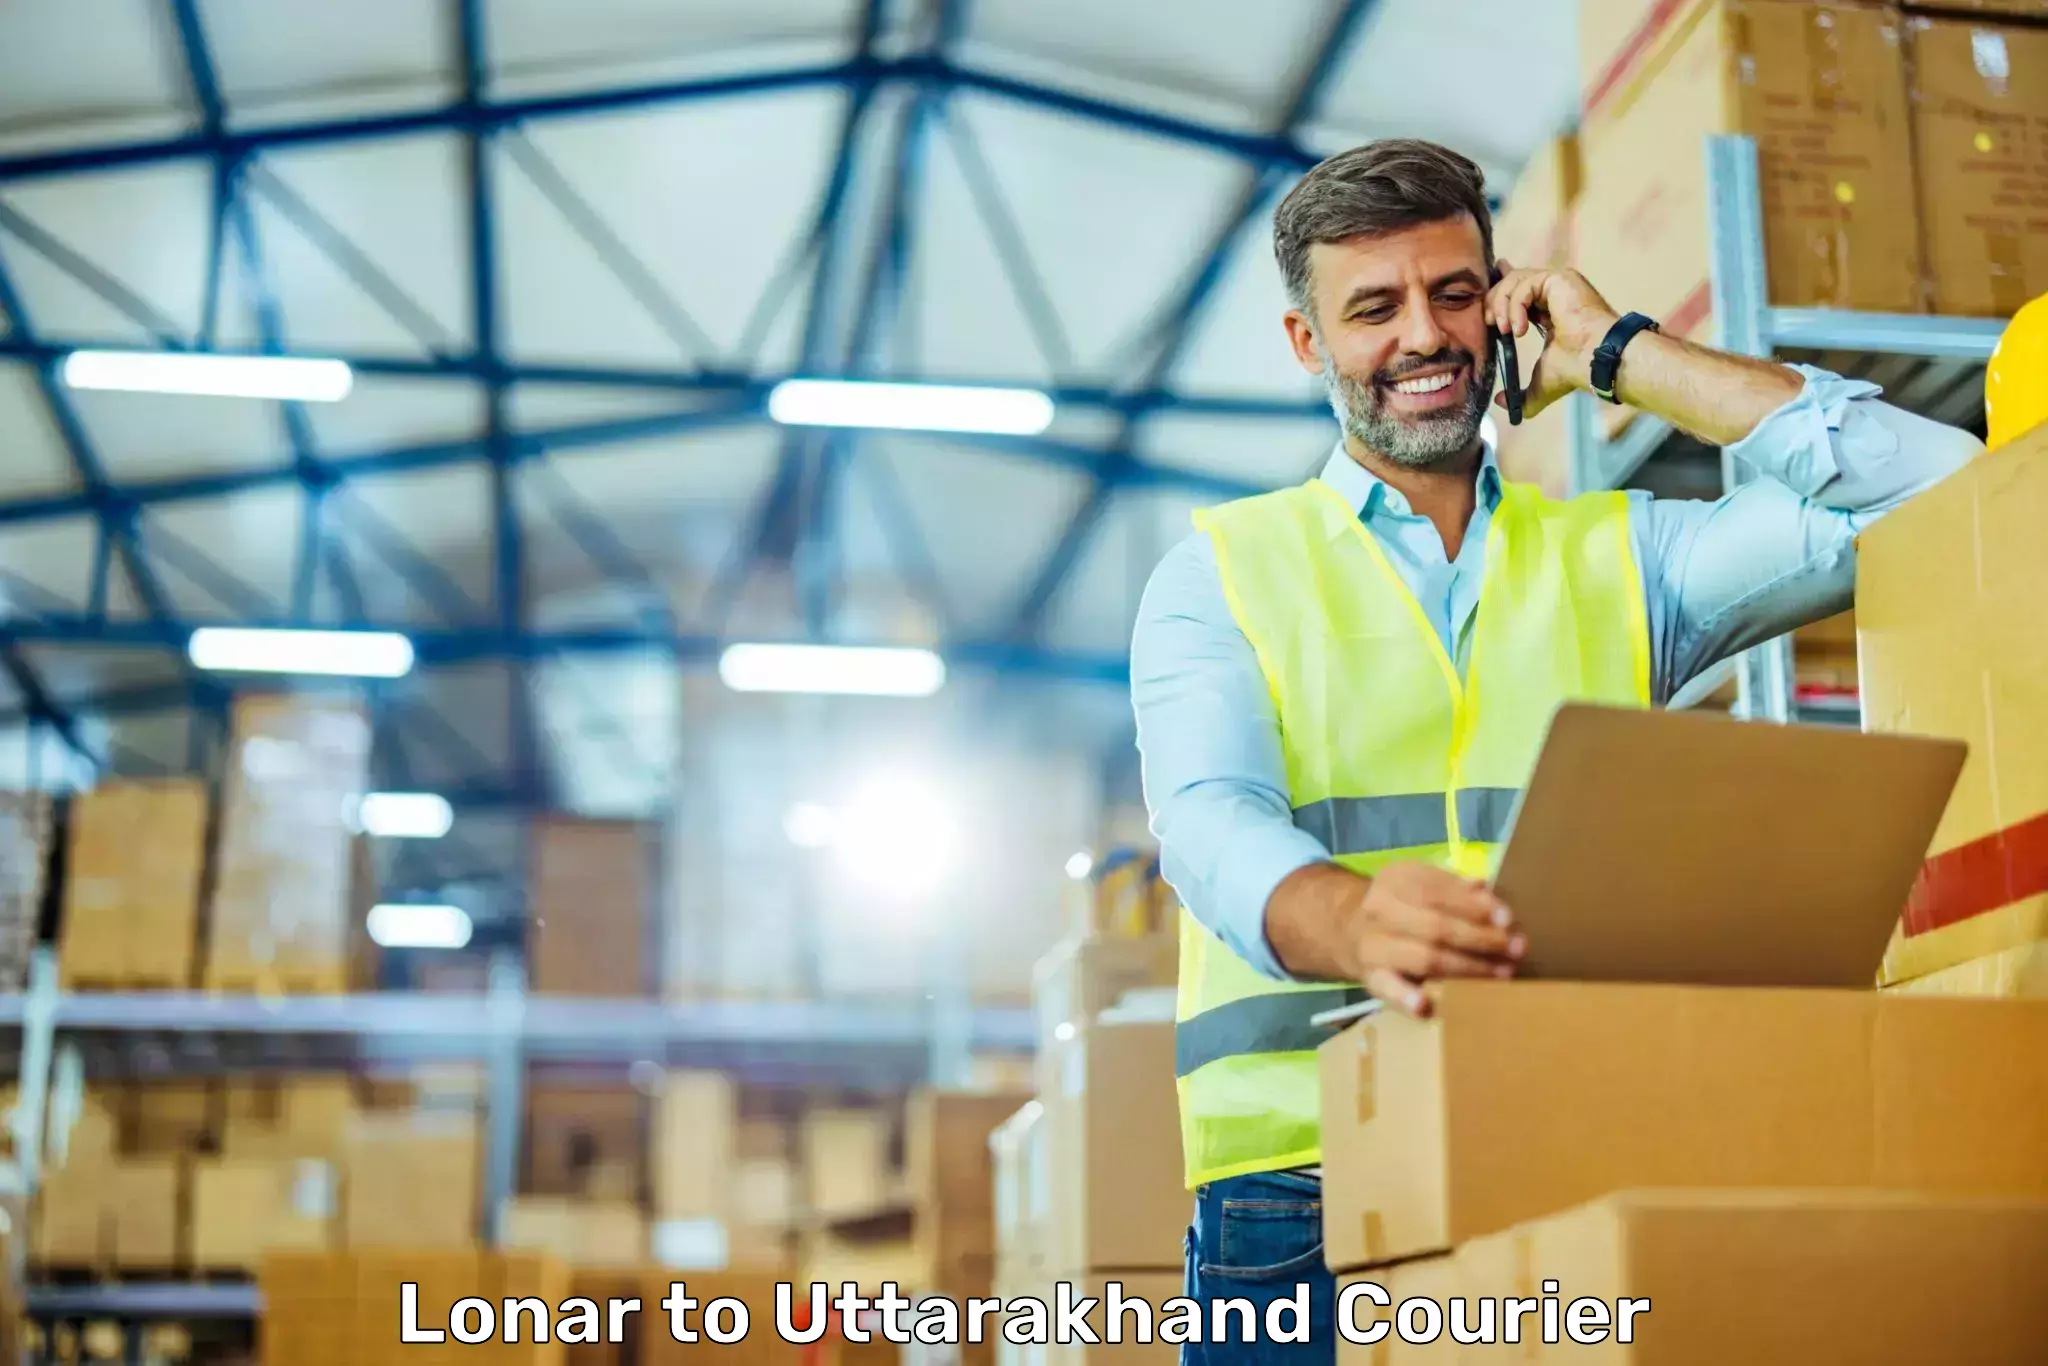 Multi-national courier services Lonar to Pithoragarh